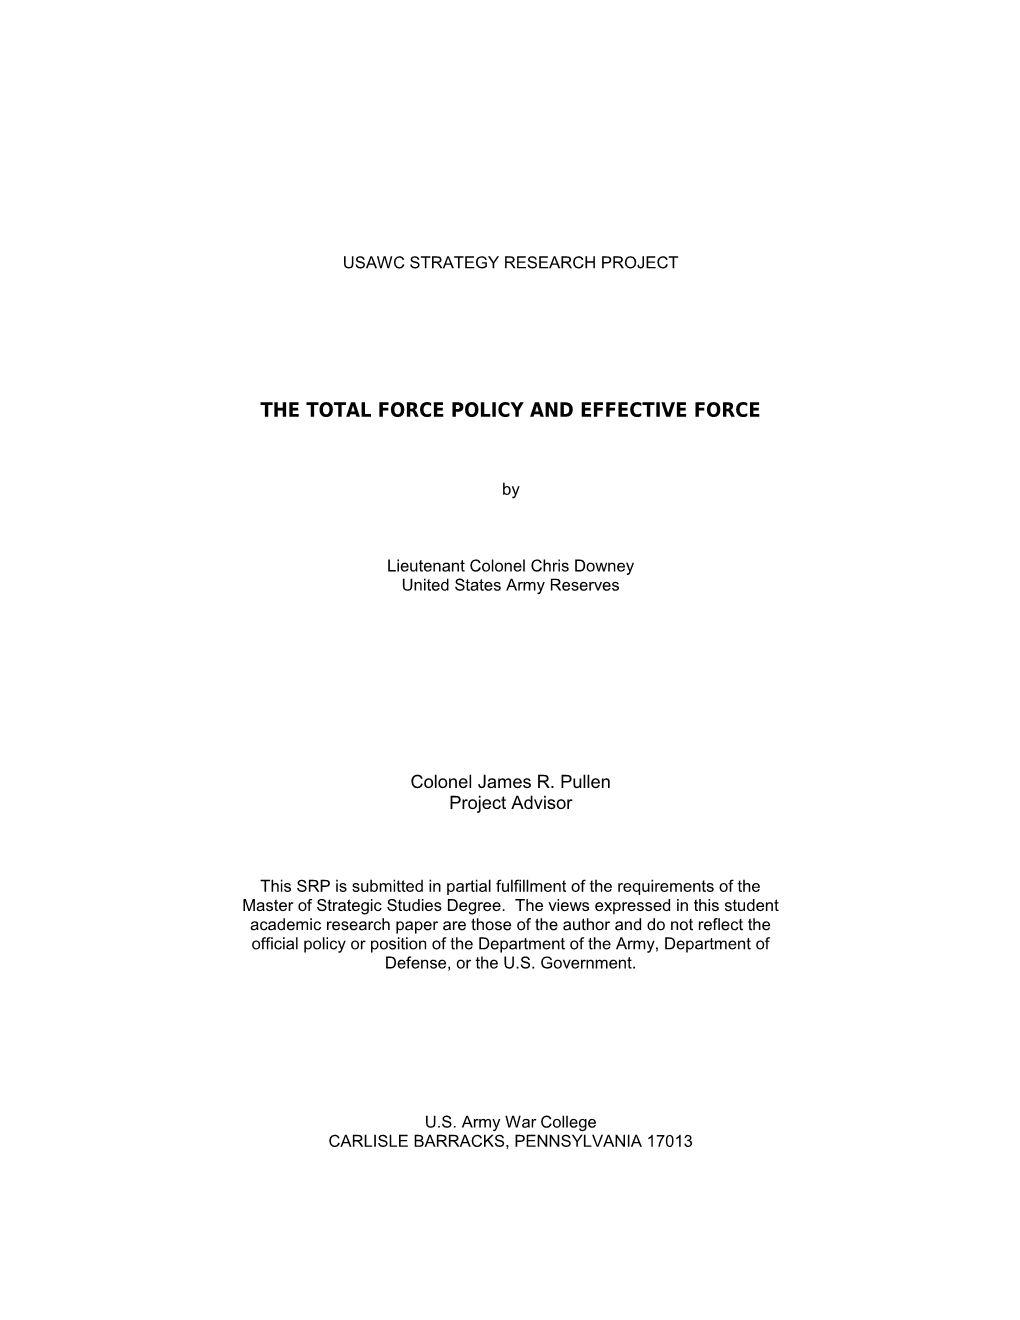 The Total Force Policy and Effective Force